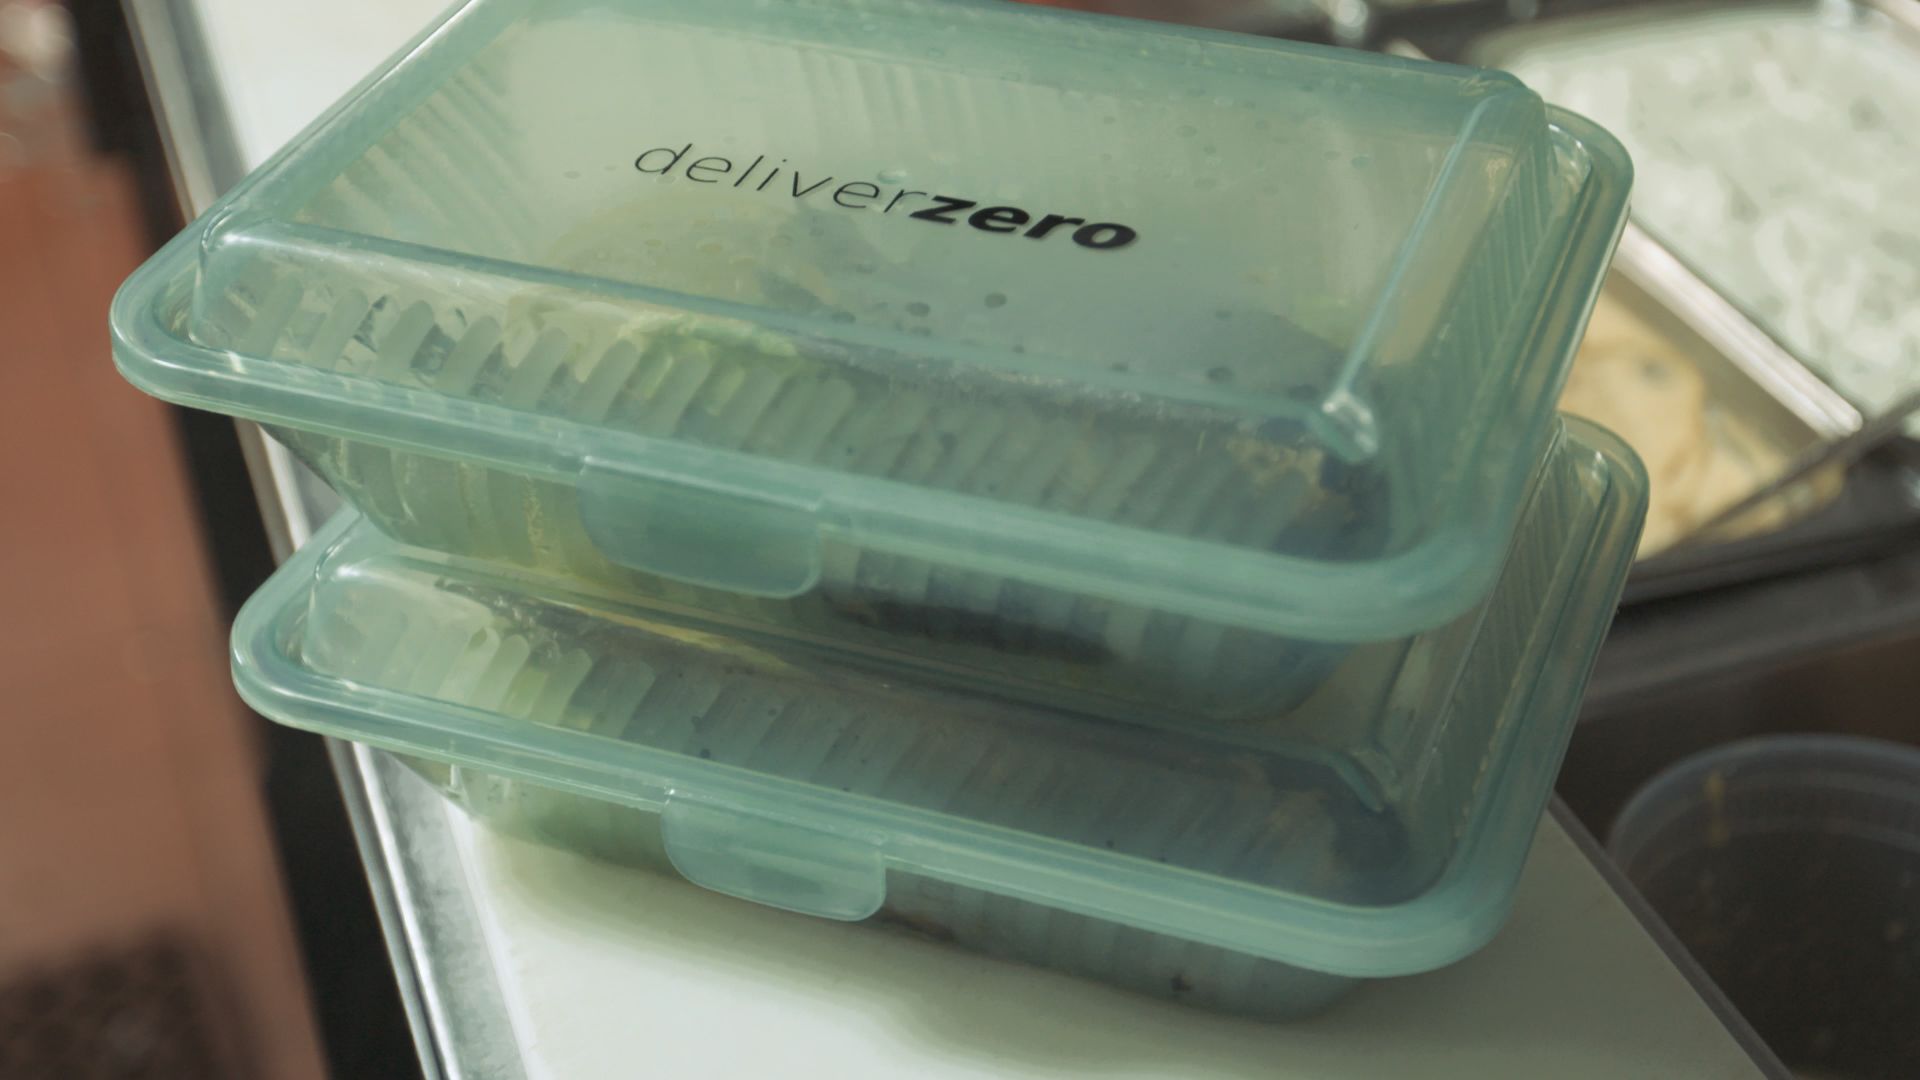 Reusable Takeout Containers & To-Go Boxes: Shop Low Prices